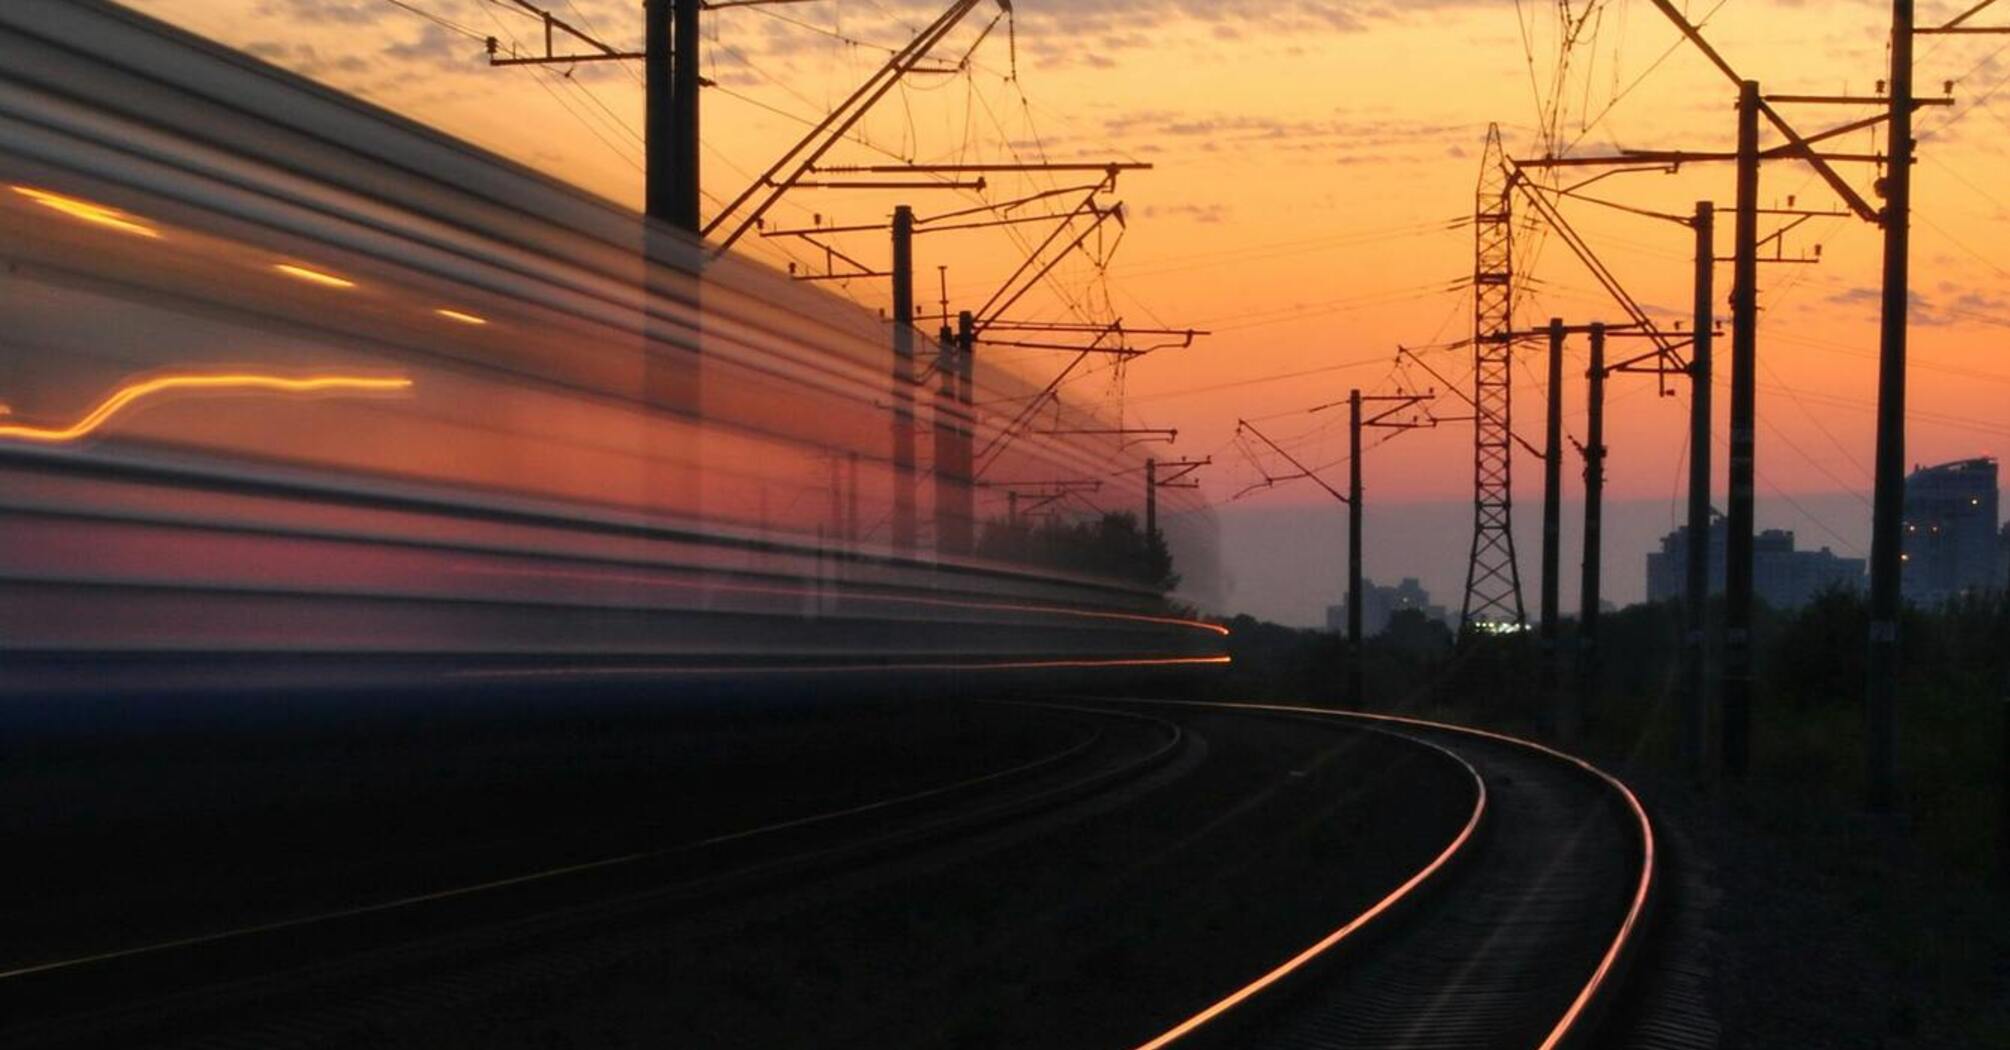 New railway connection: FirstGroup is preparing a route from London to Glasgow in 2025